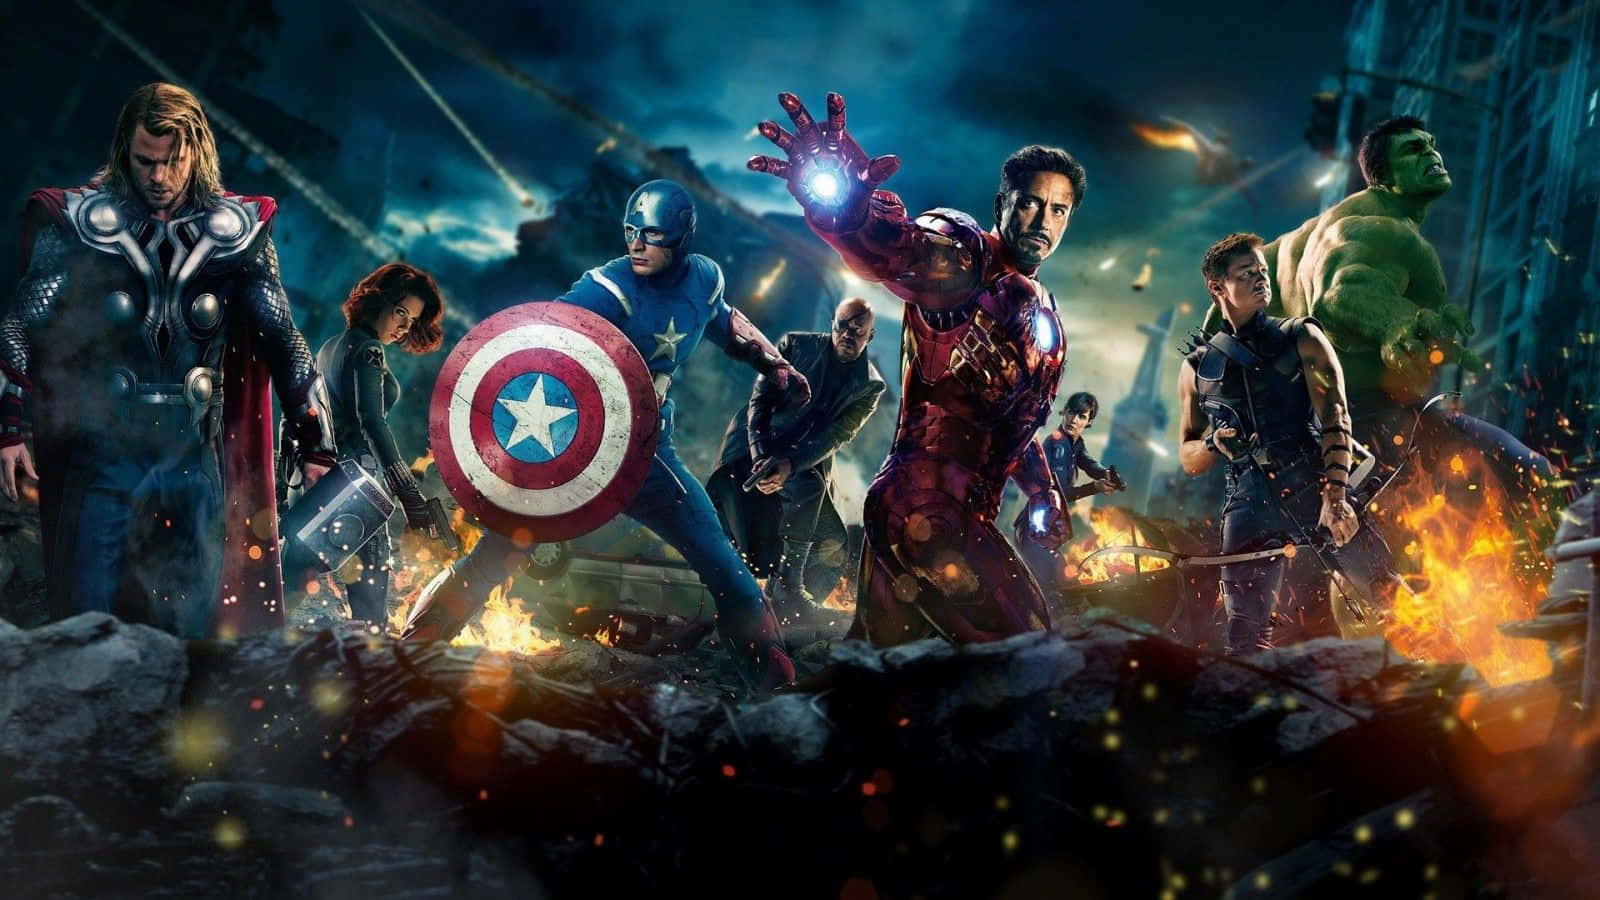 The Avengers Movie Is Shown In A Dark Background Wallpaper